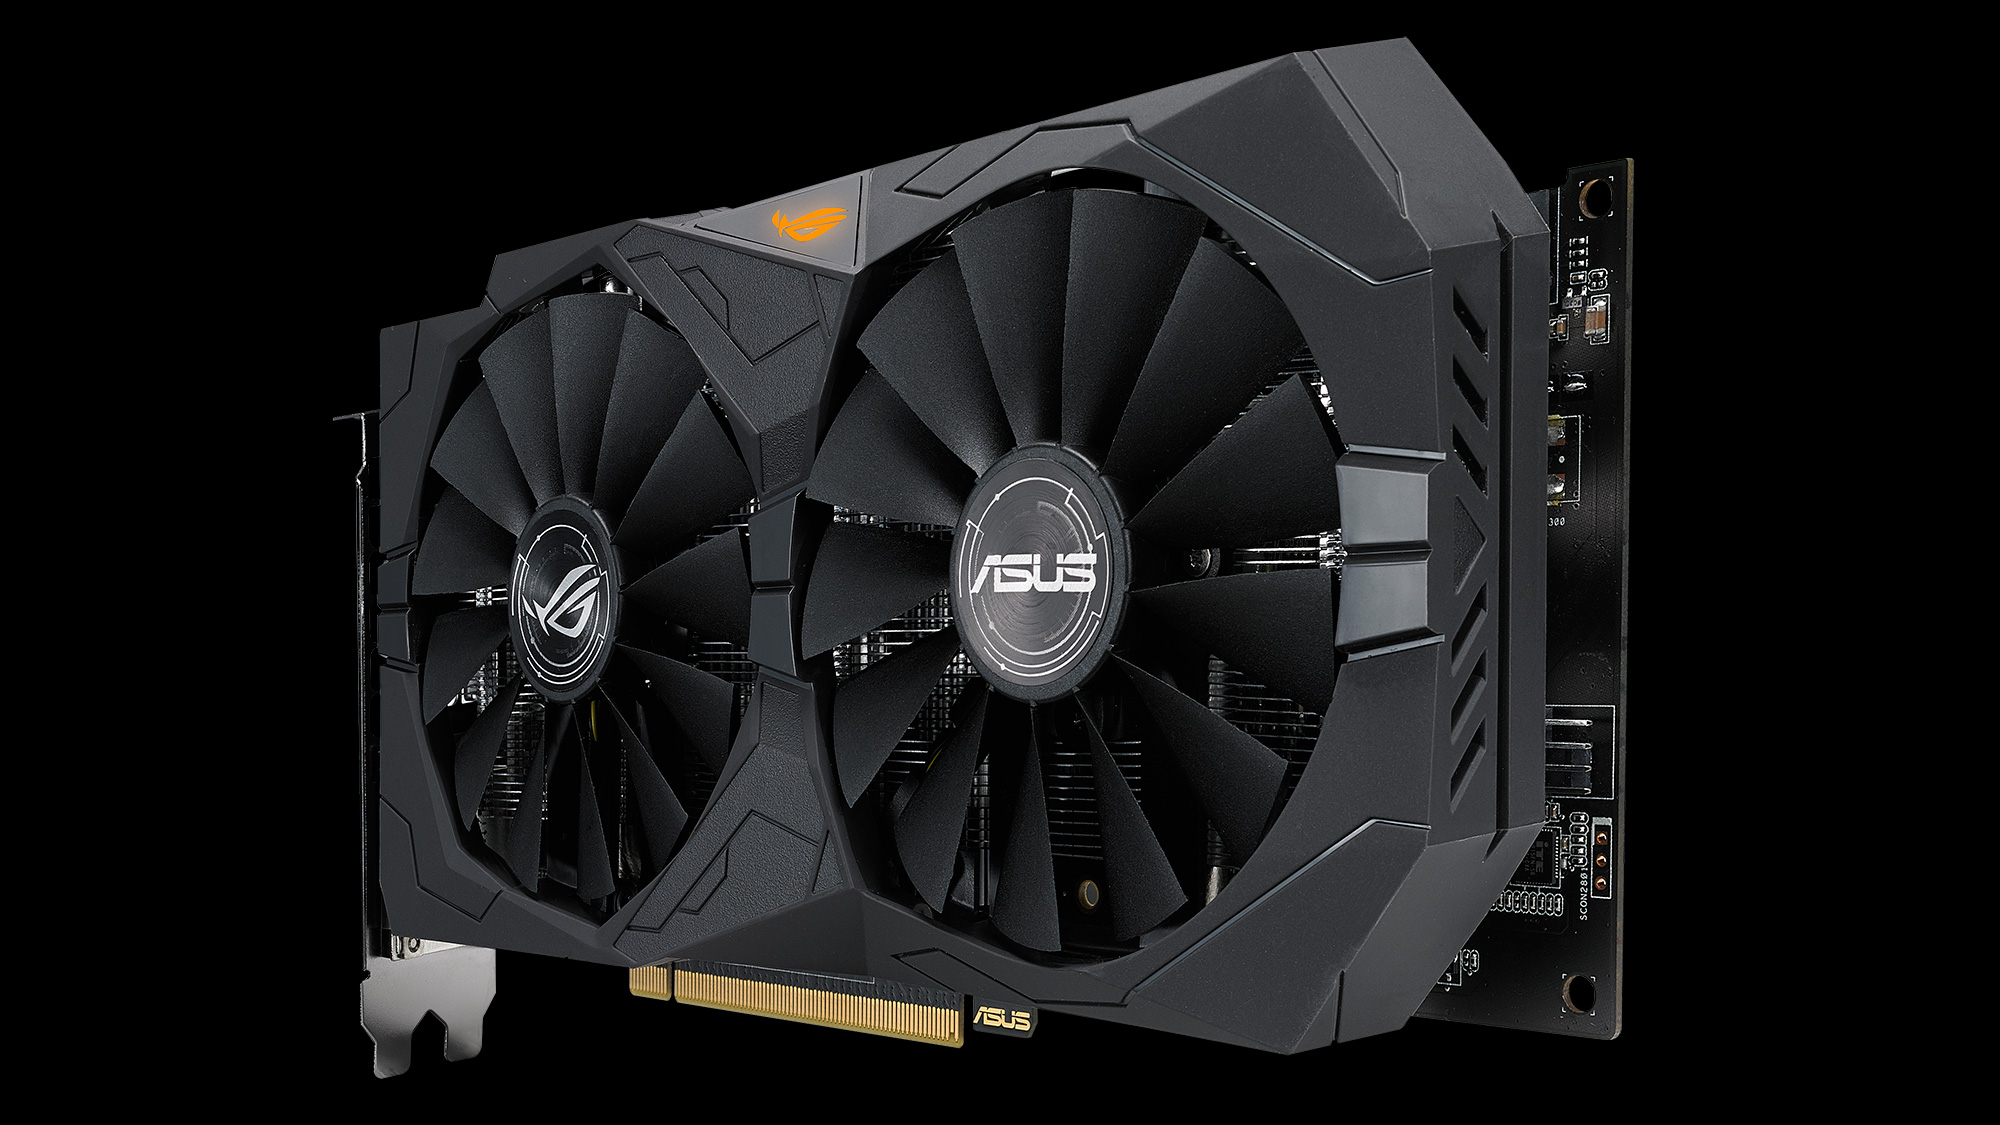 Media asset in full size related to 3dfxzone.it news item entitled as follows: ASUS lancia la video card gaming-oriented ROG Strix Radeon RX 470 | Image Name: news24713_ASUS-ROG-Strix-Radeon-RX-470_1.jpg